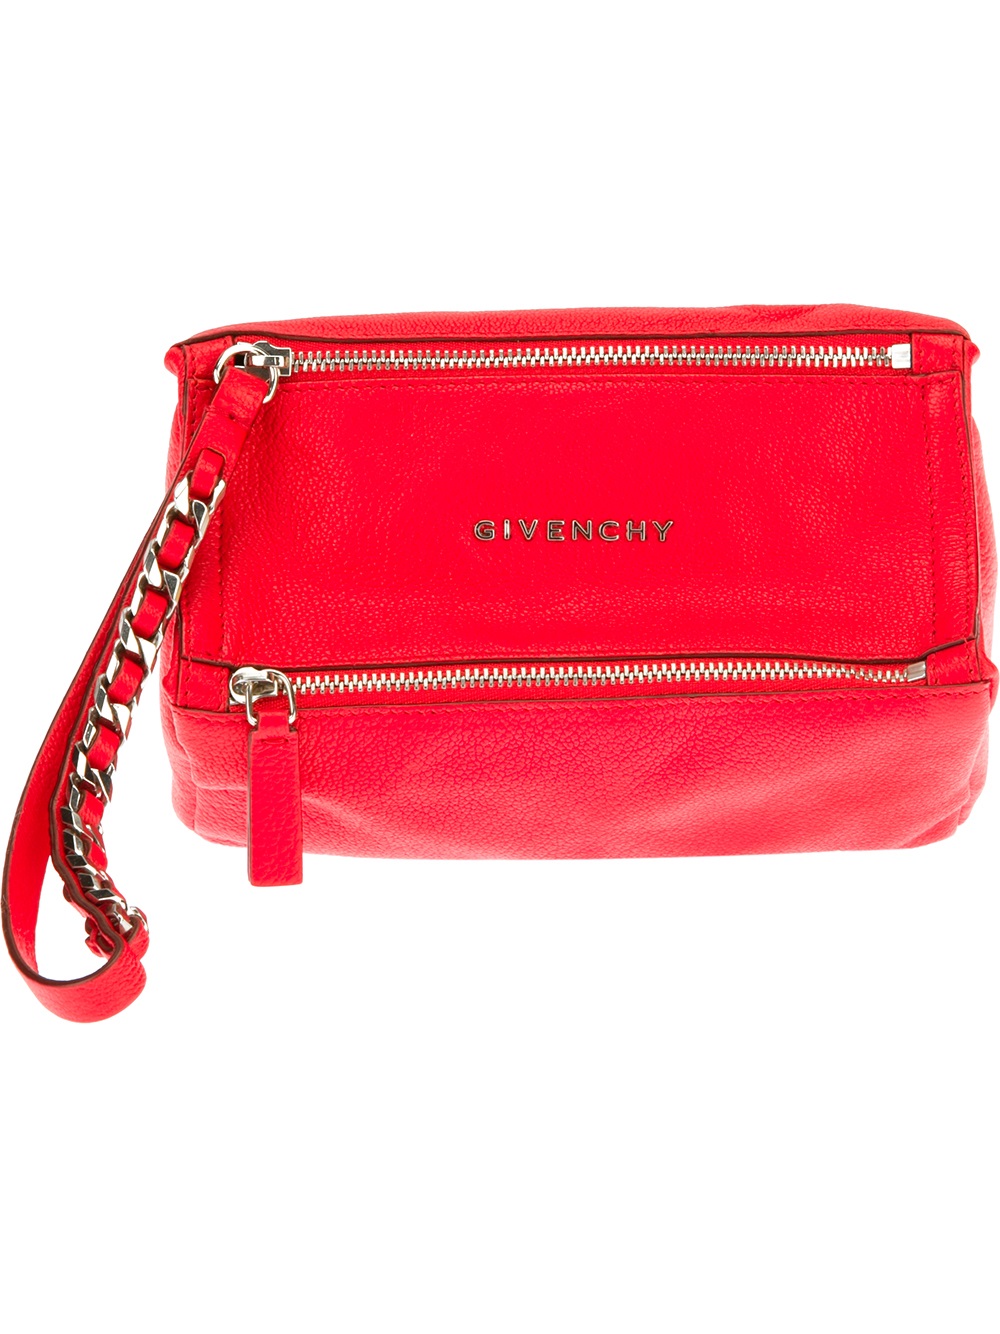 Lyst - Givenchy Pandora Clutch in Red